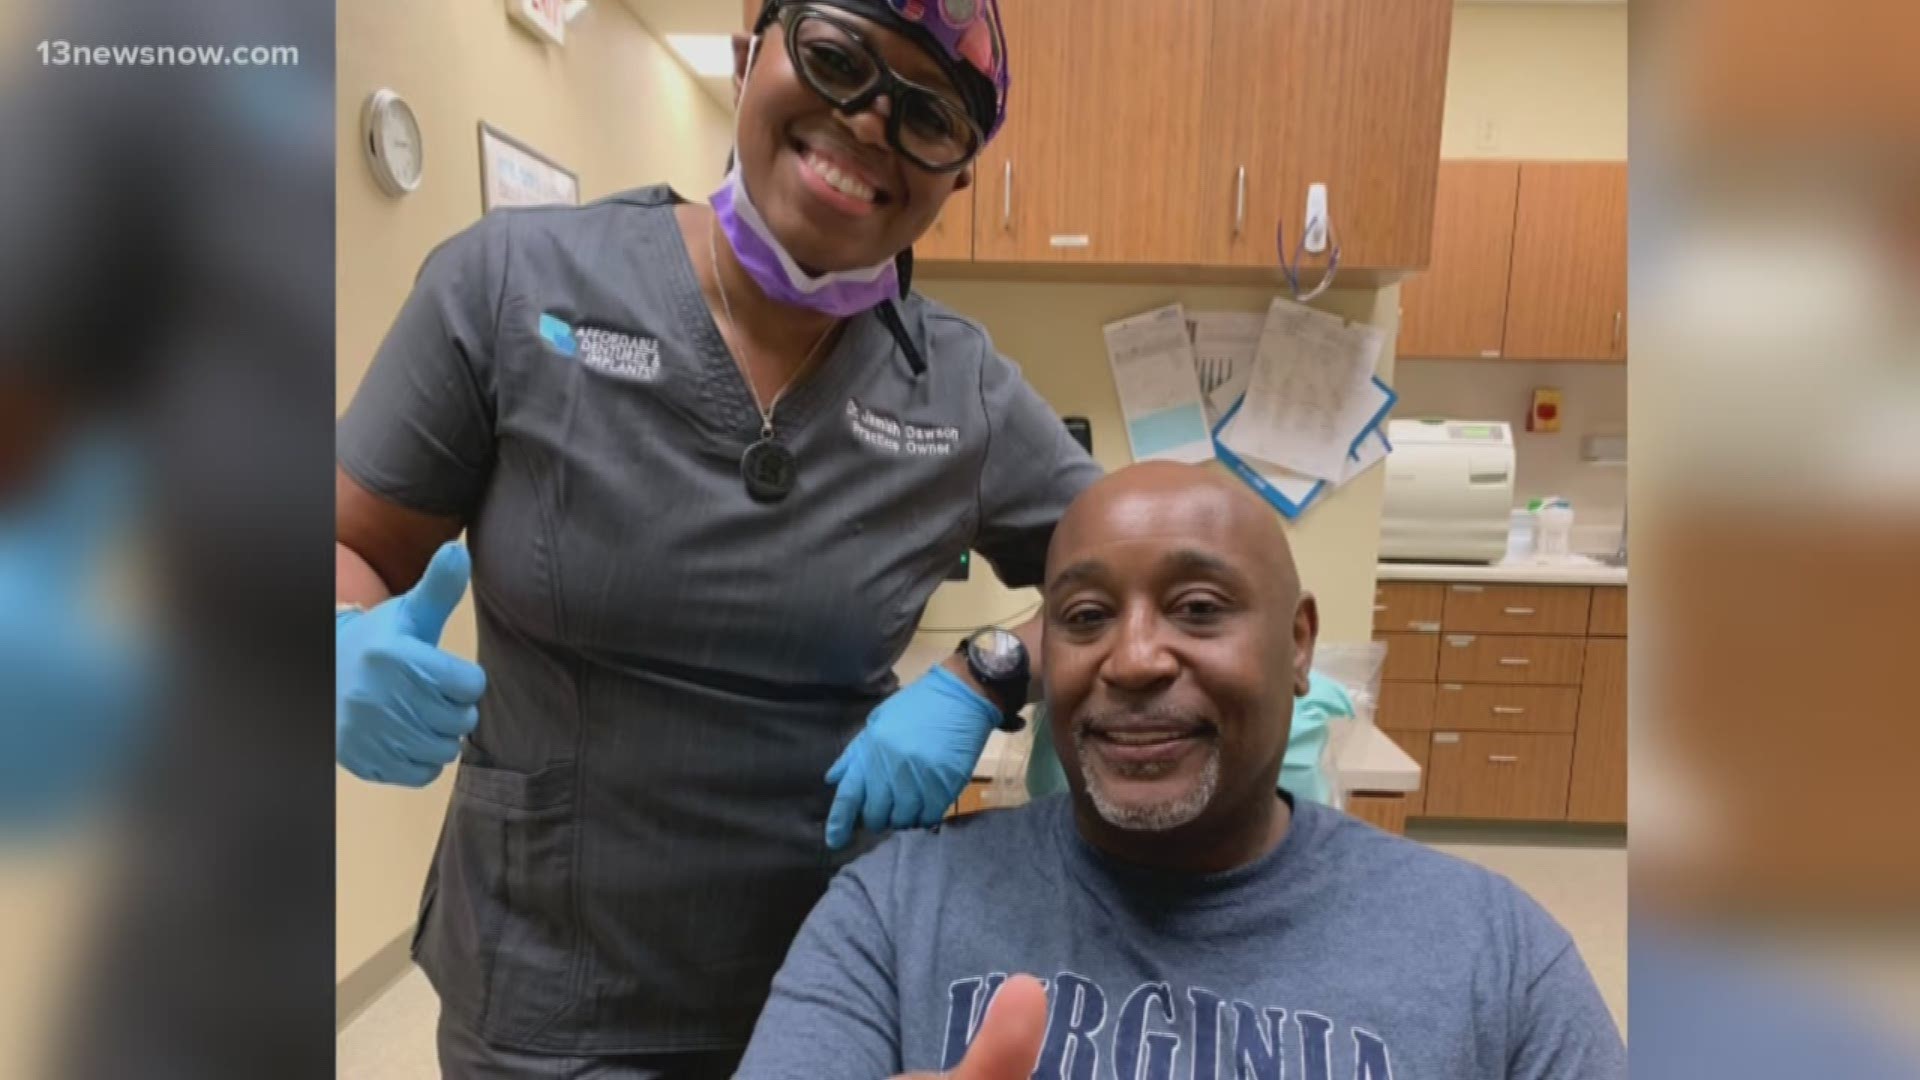 Newport News Dentist Jamiah Dawson, who is also a Navy veteran, helped Travis Arrington, another Navy veteran. She gave him back his smile.